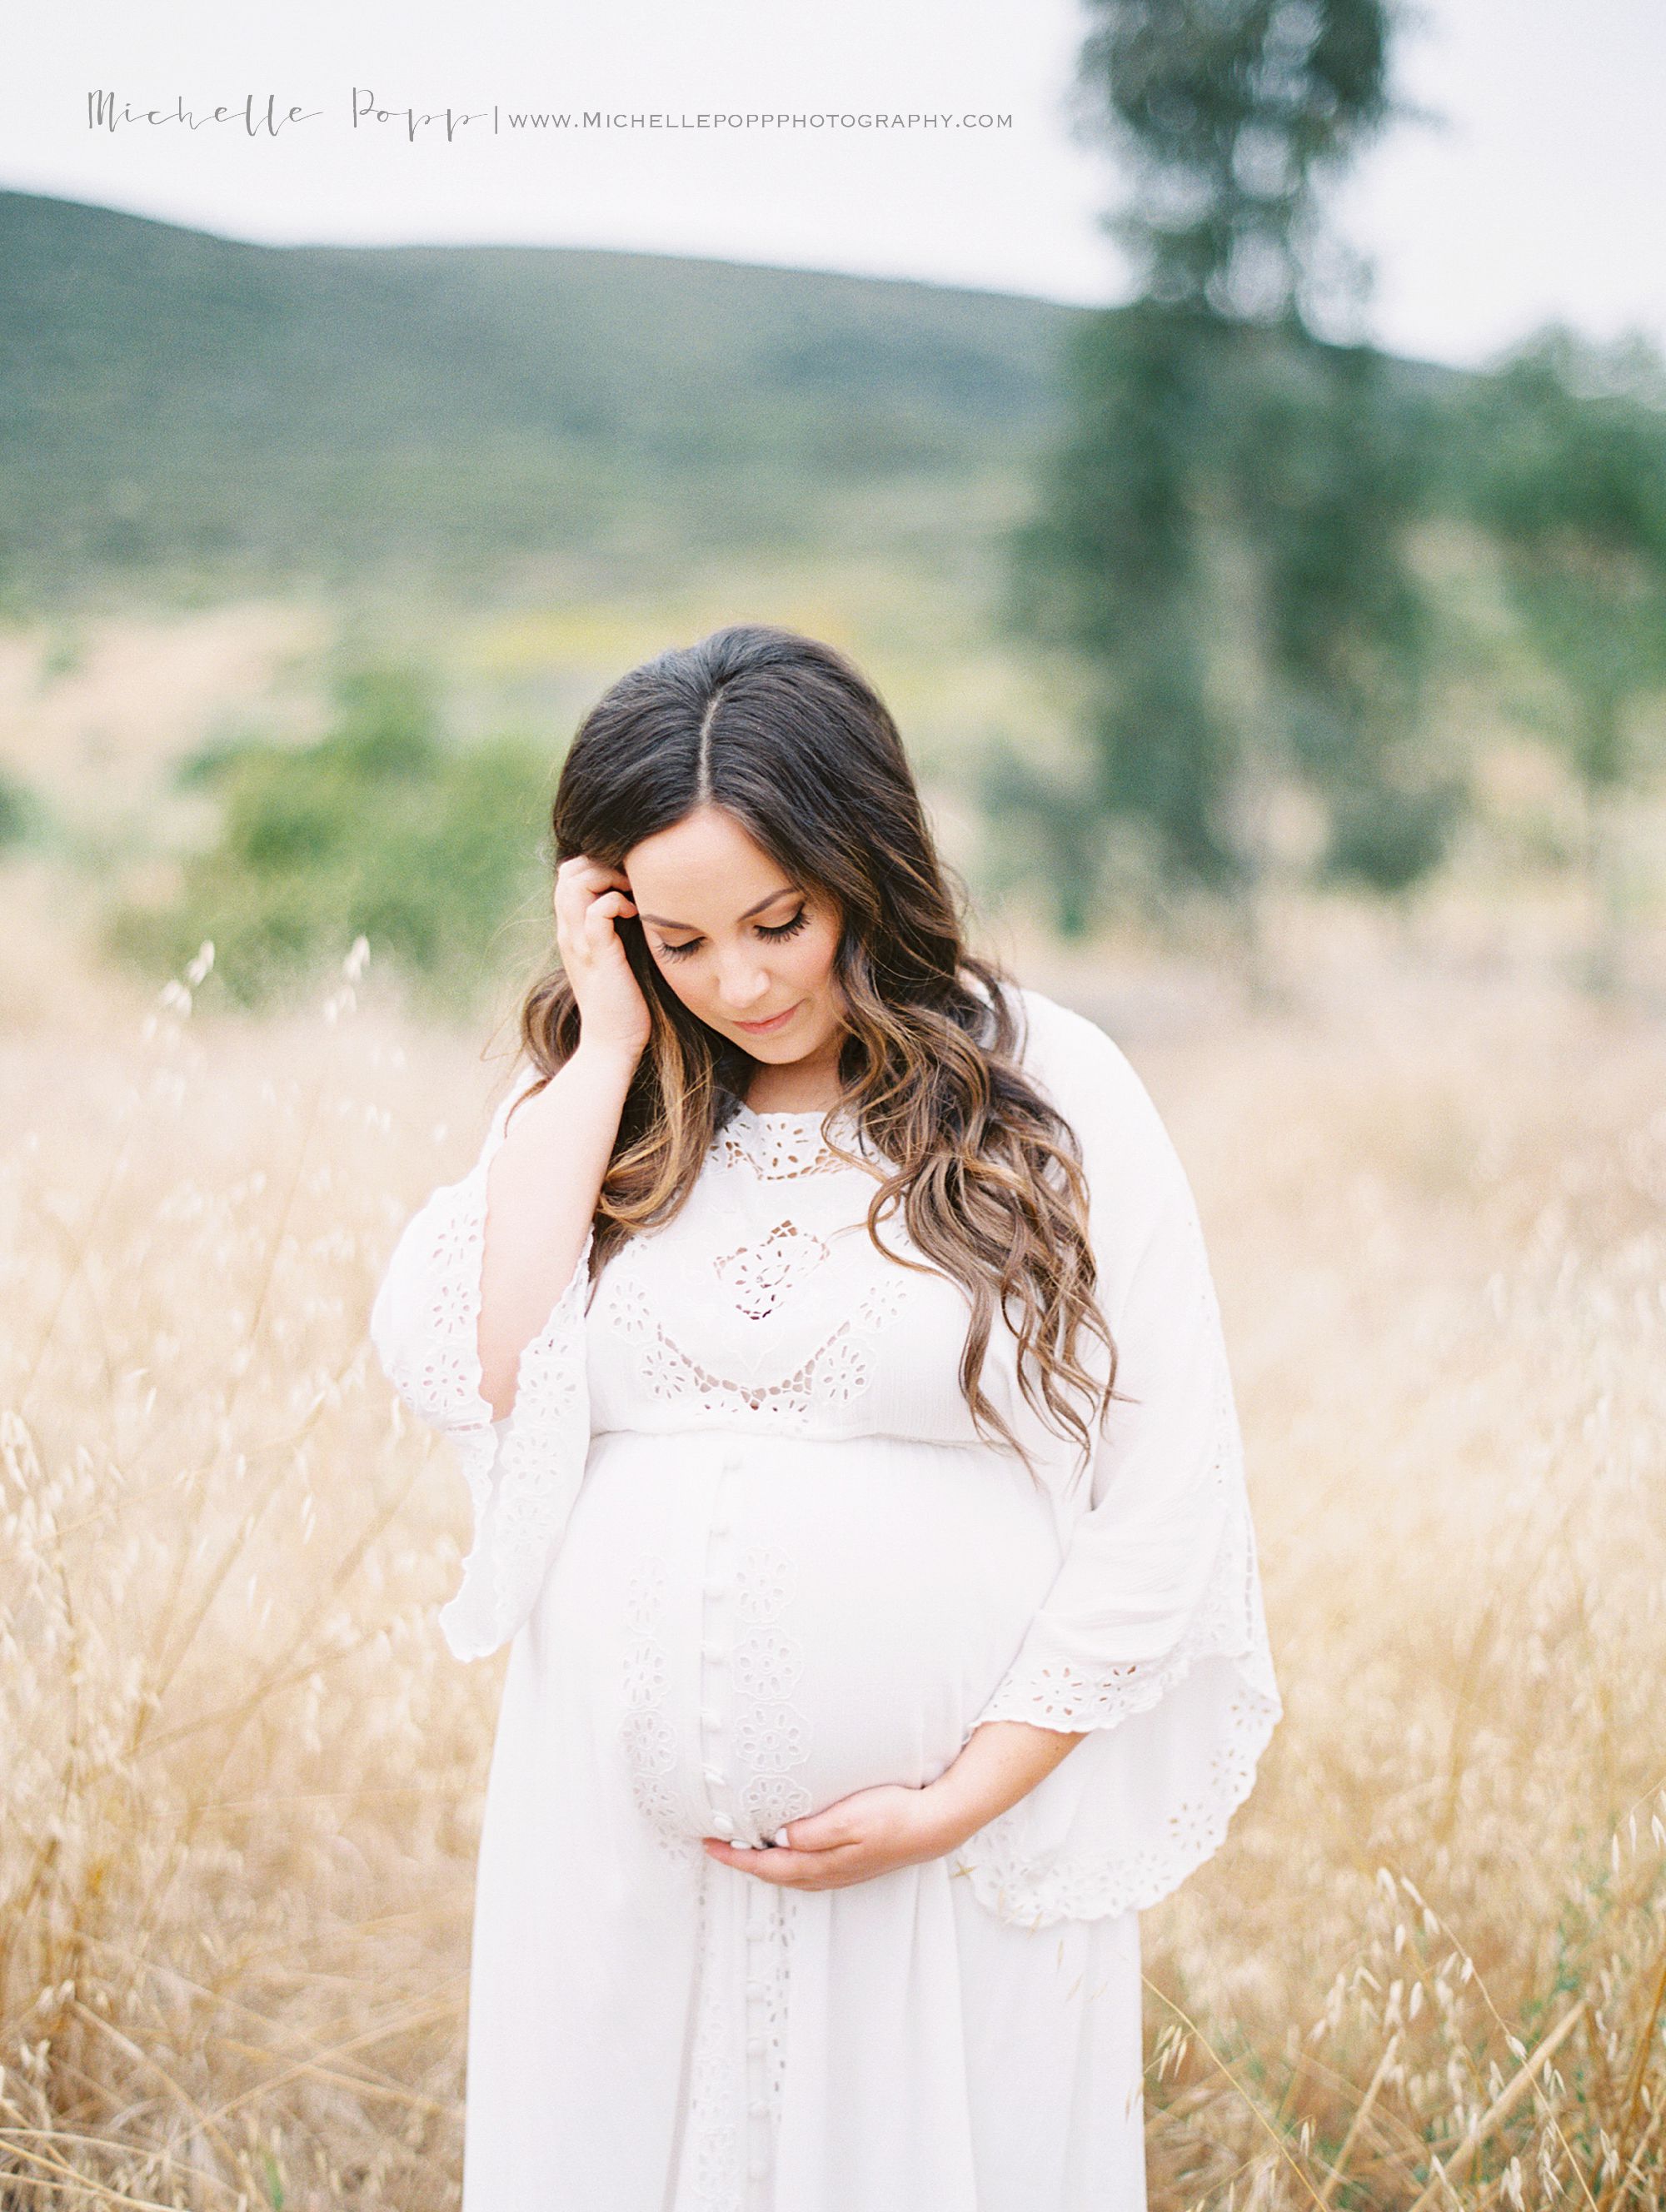 Reasons Why You Should Book a Maternity Session